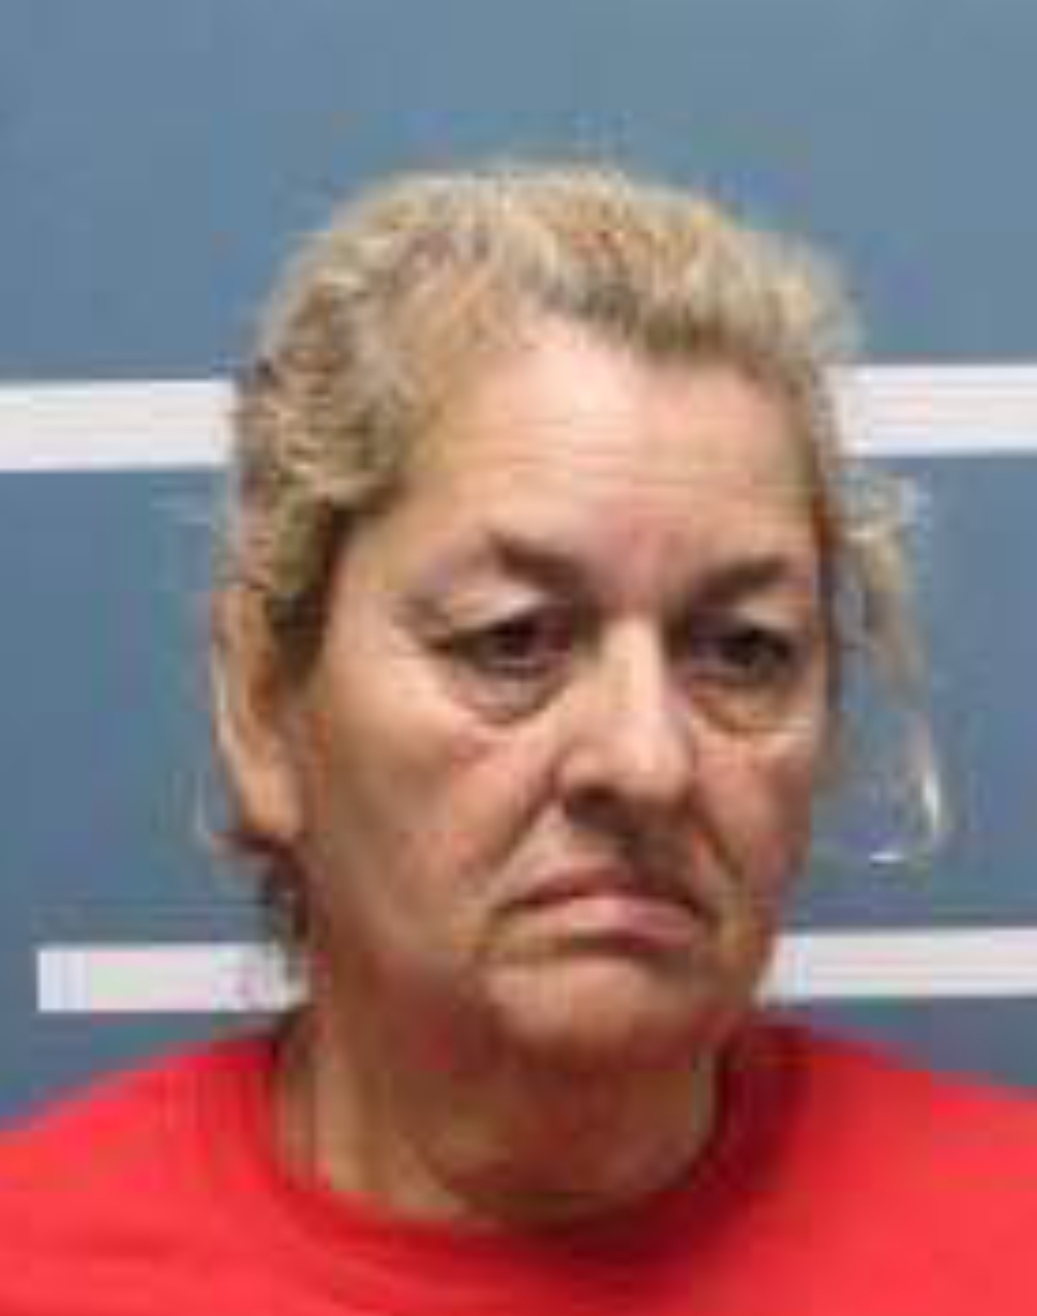 Grandma Busted for Selling Meth Out of Her Home With her Grand Kids Inside